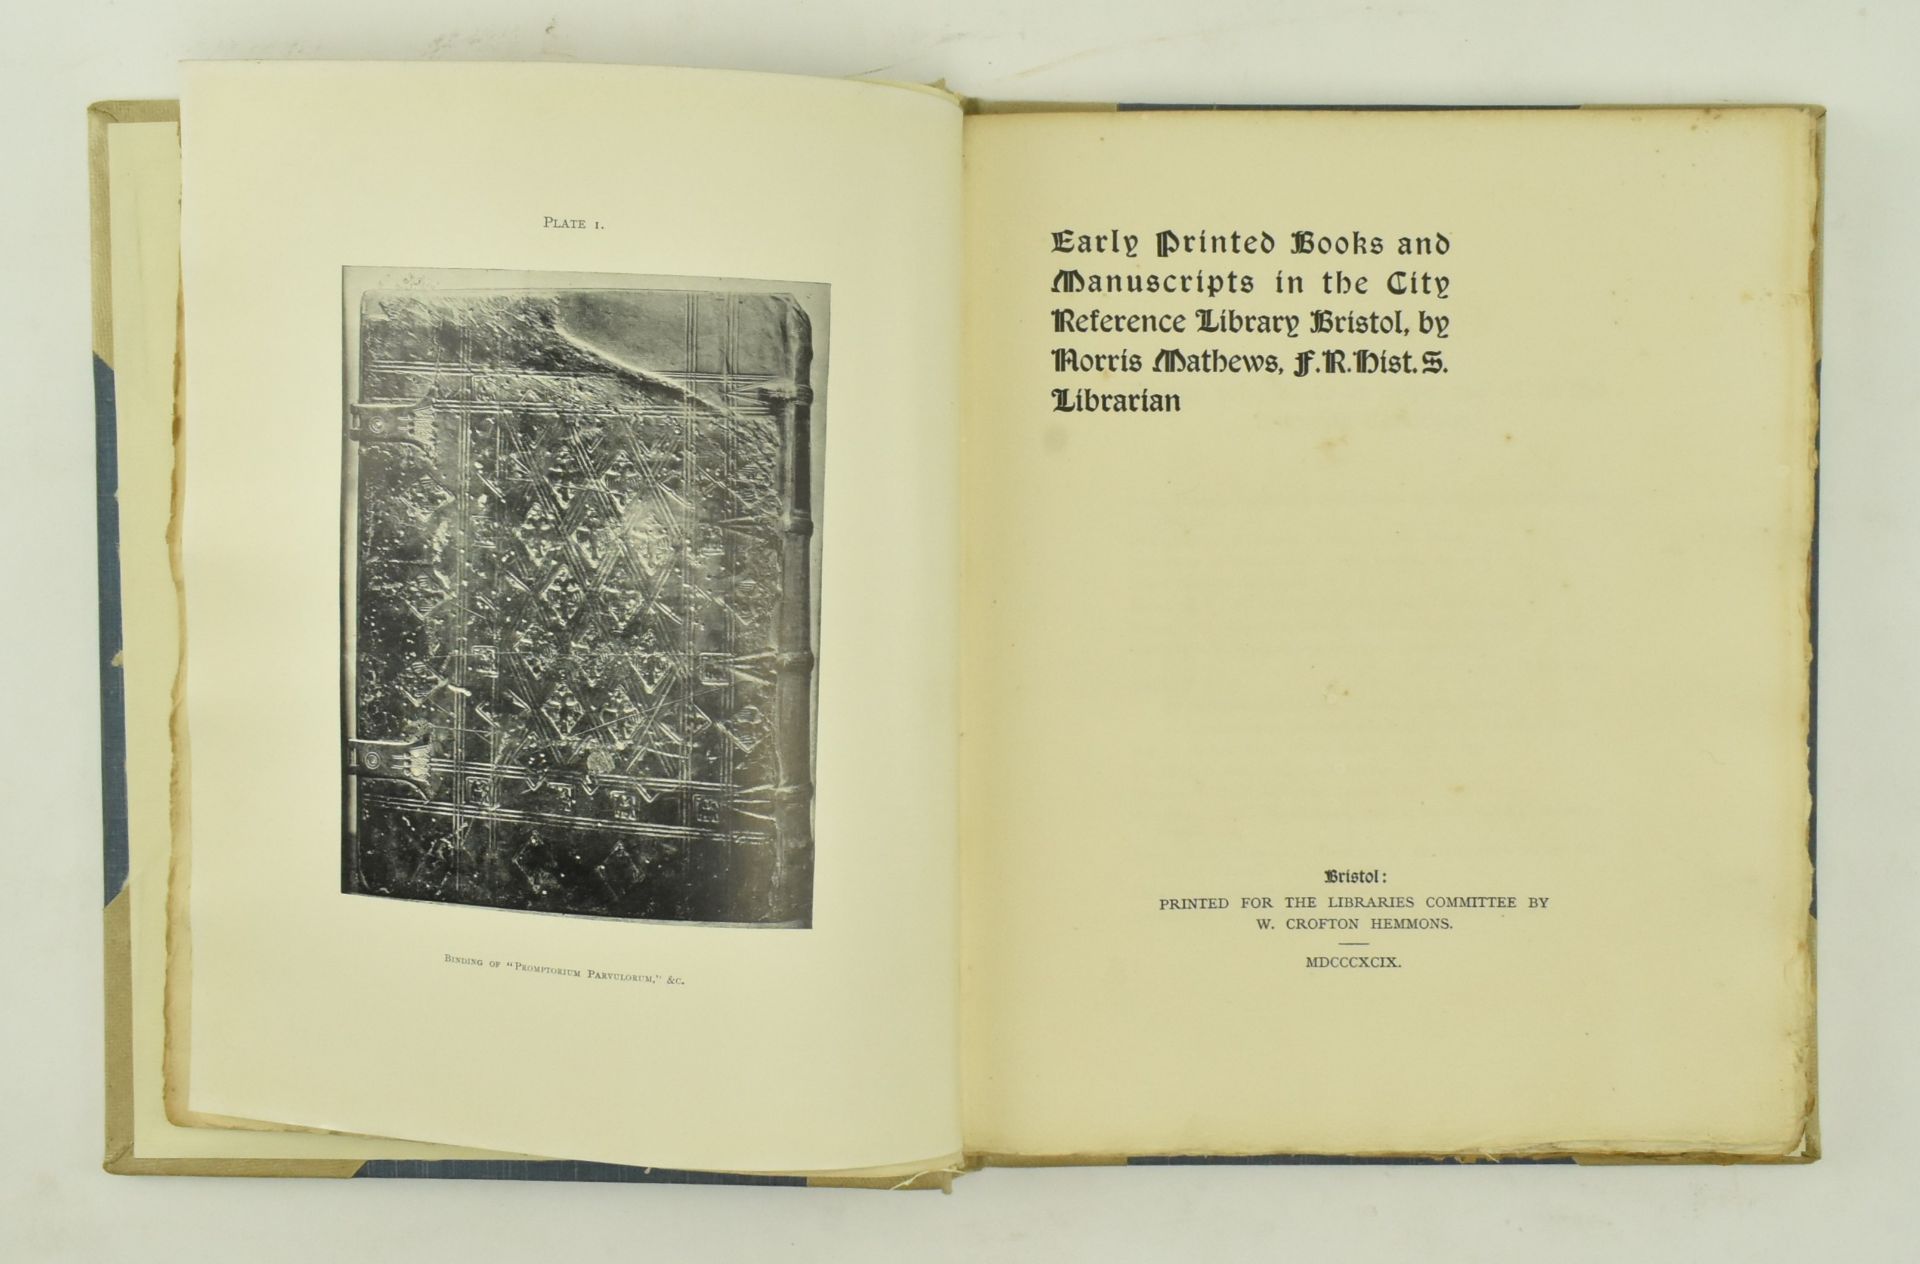 1899 EARLY PRINTED BOOKS IN THE CITY REFERENCE LIBRARY, BRISTOL - Image 4 of 8